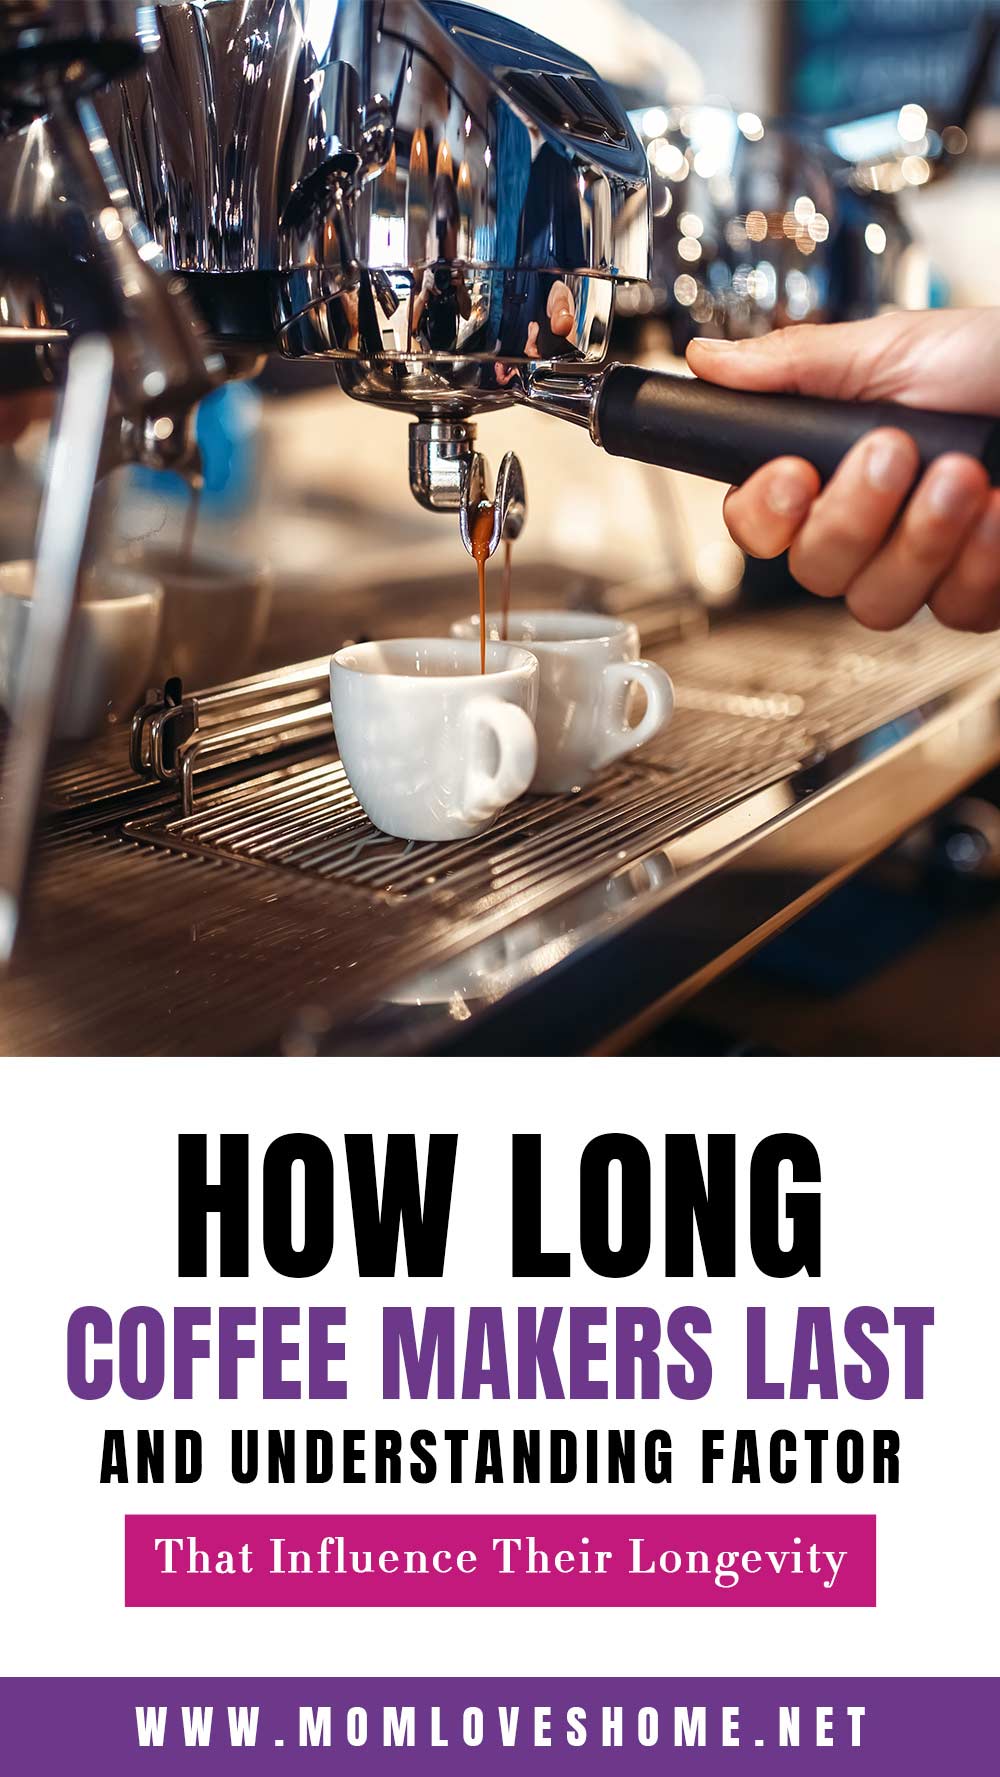 How Long Coffee Makers Last